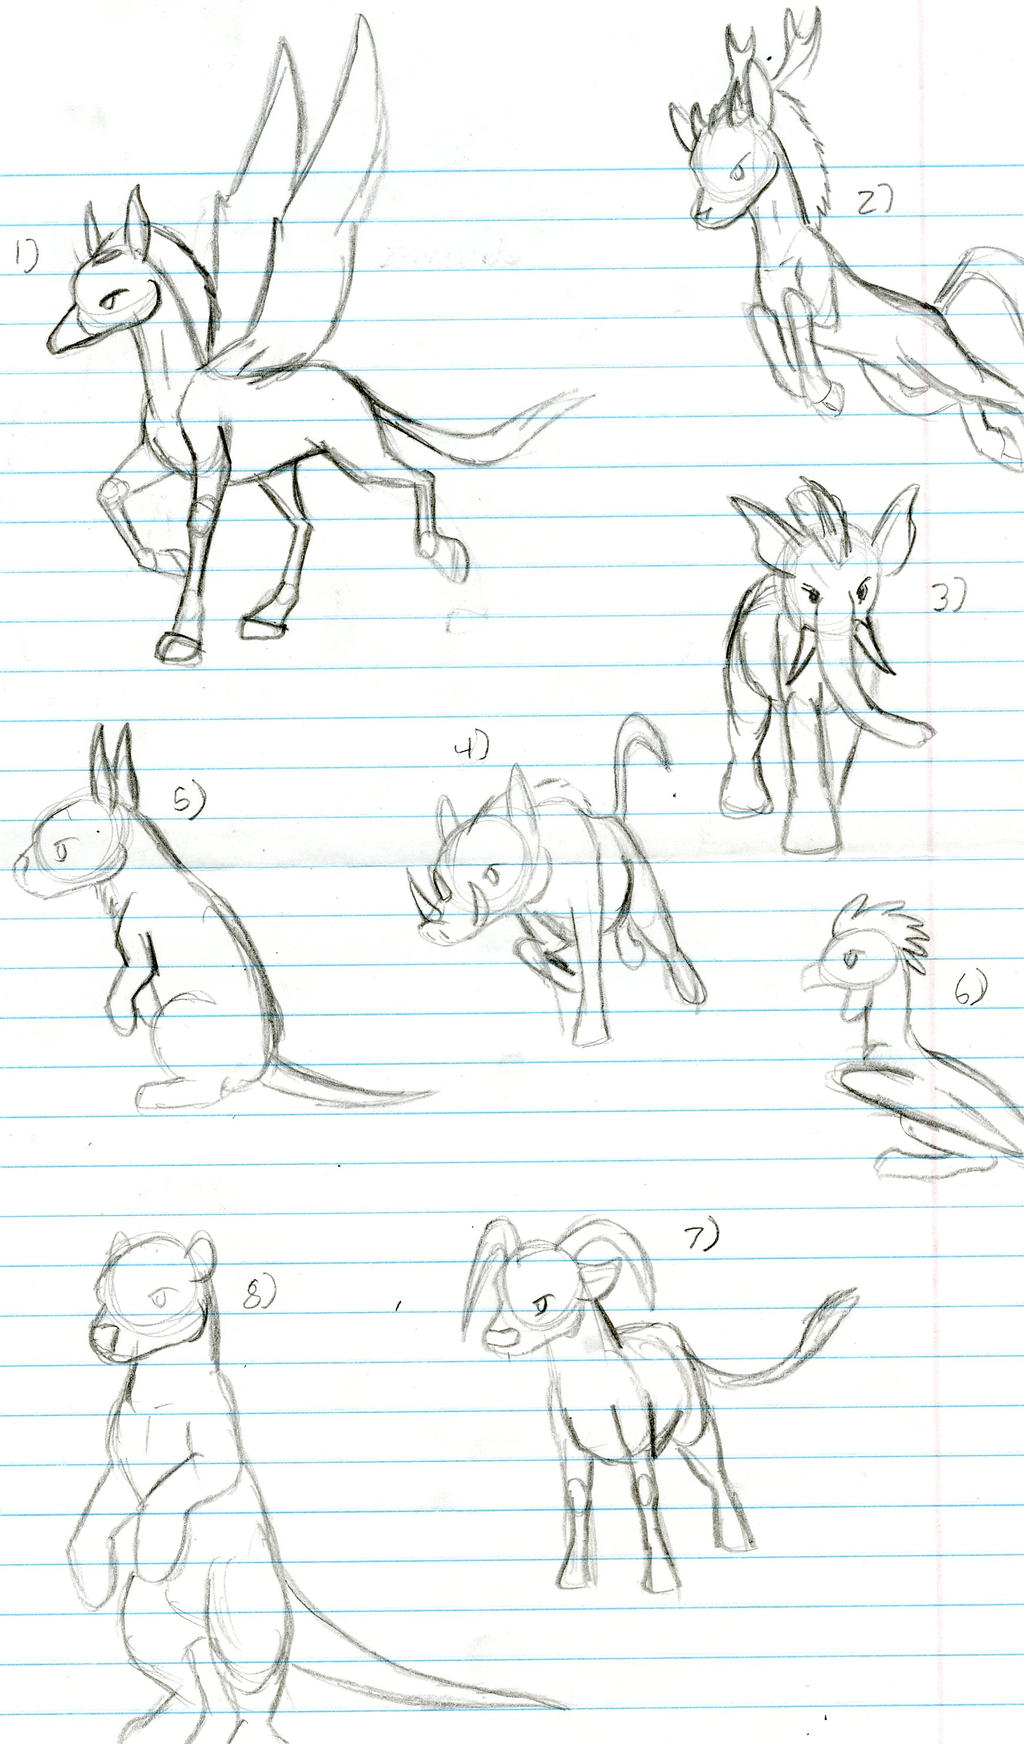 Old animal hybrid sketches by Rexander134 on DeviantArt